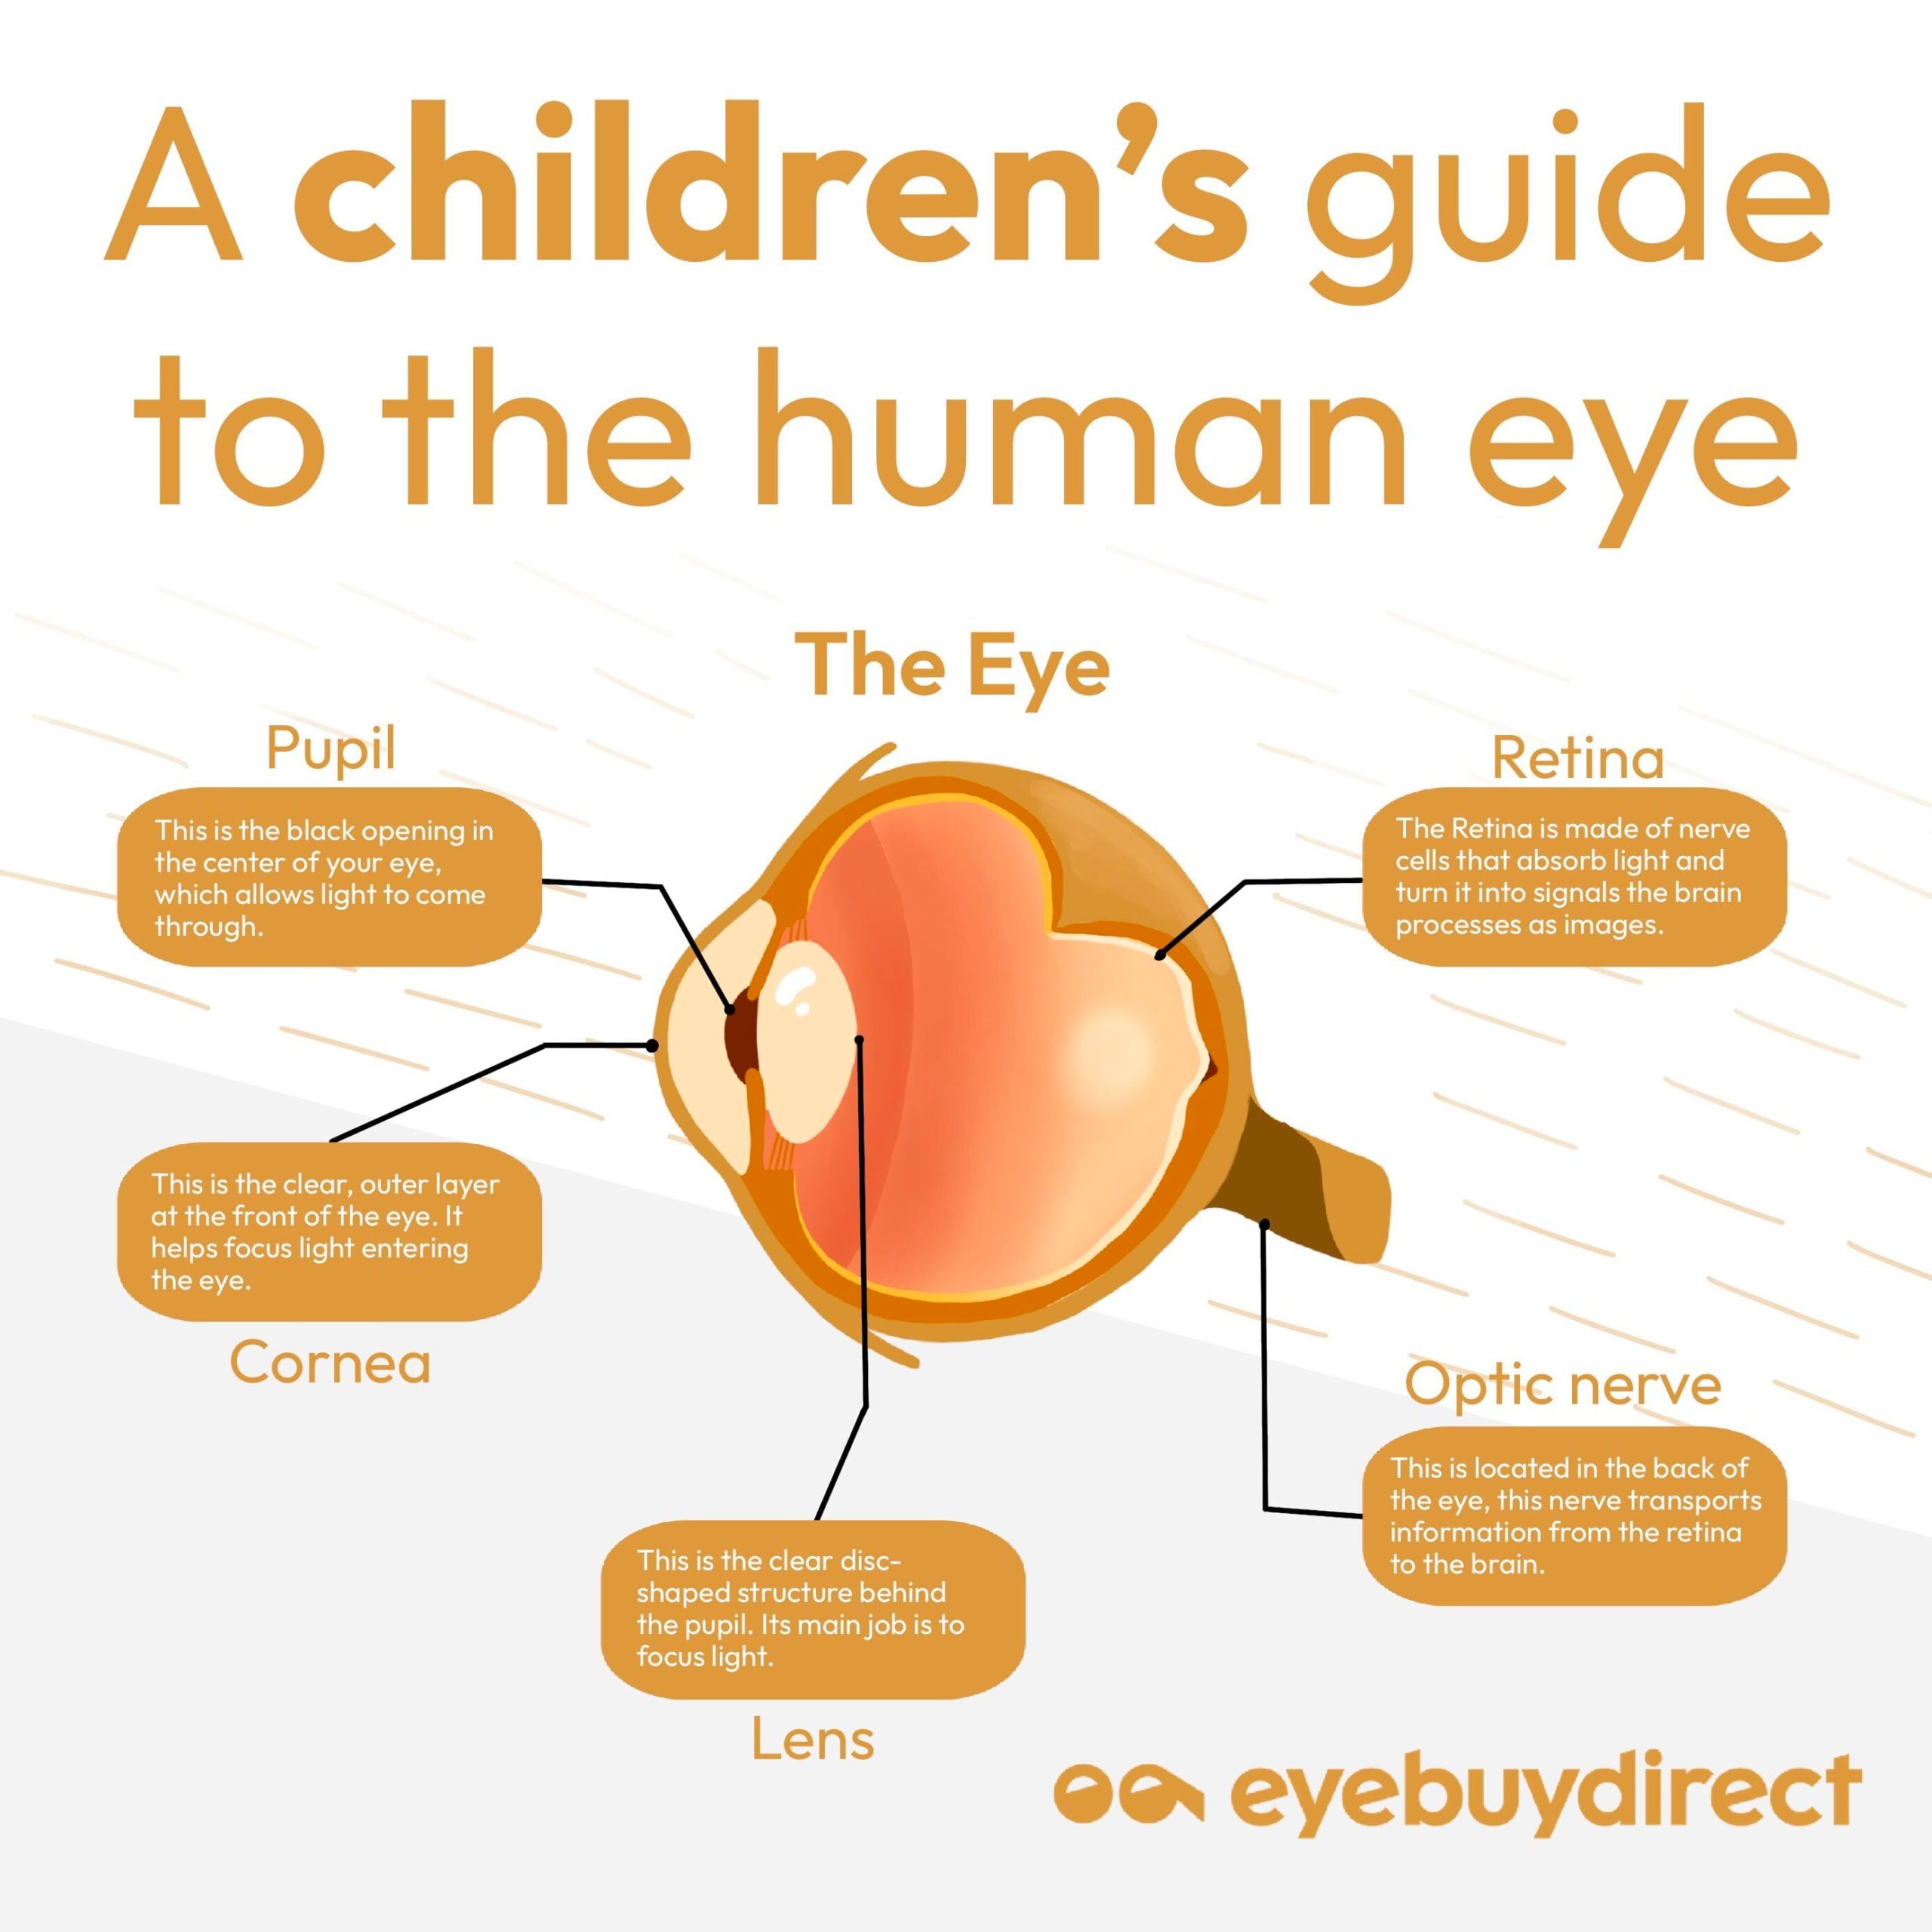 An infographic showing interesting facts about the human eye